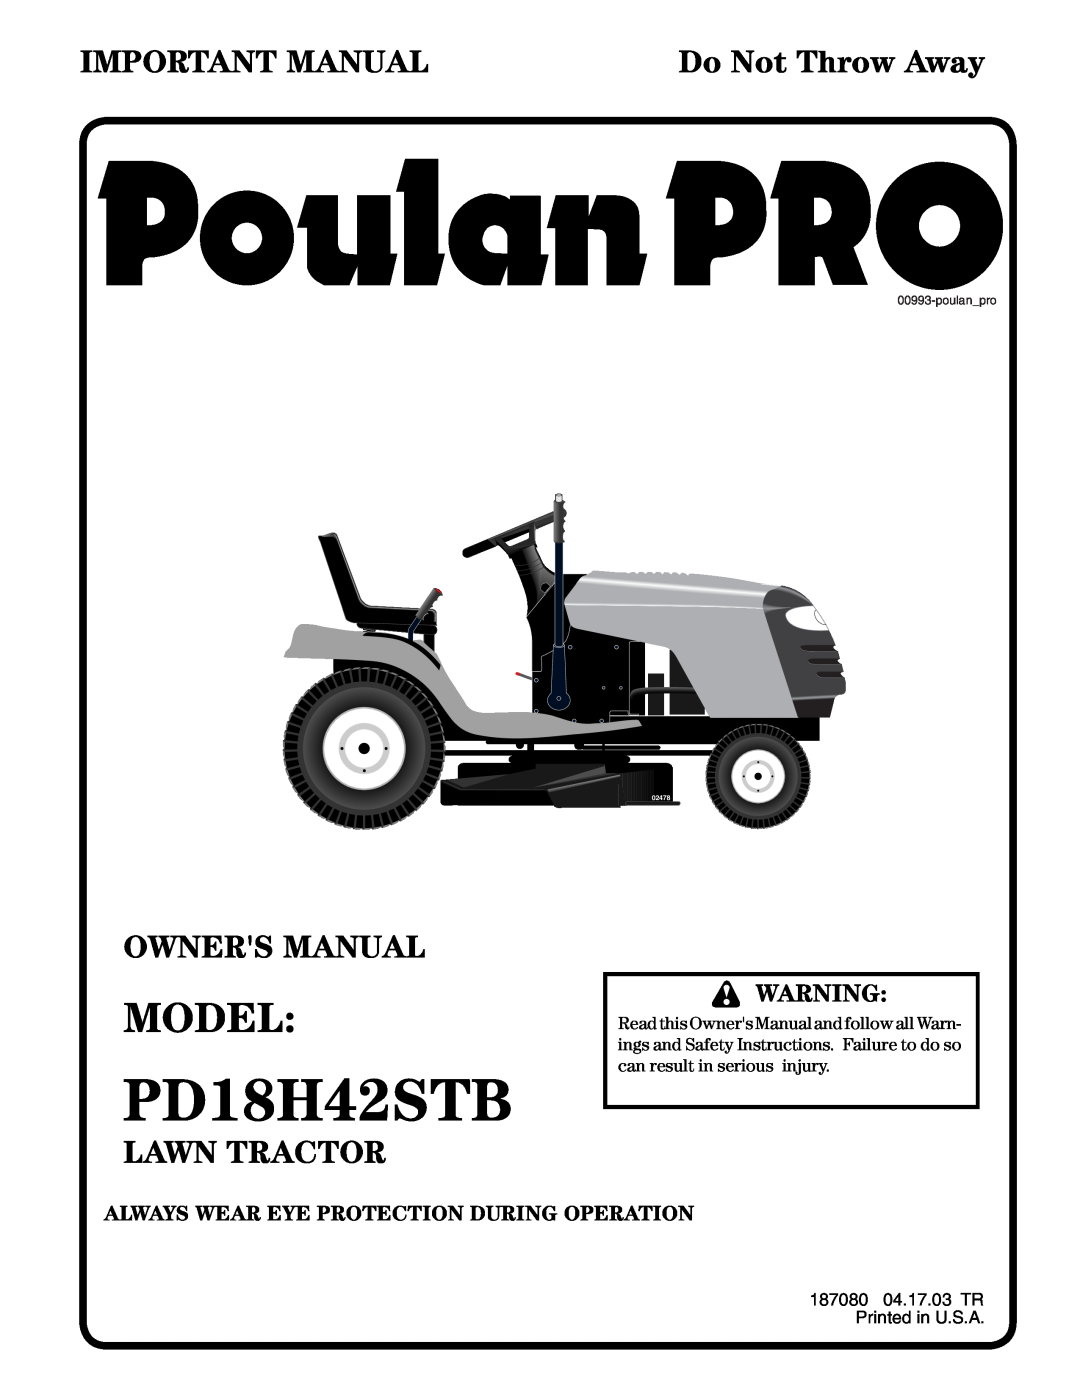 Poulan PD18H42STB owner manual Model, Important Manual, Owners Manual, Lawn Tractor, Do Not Throw Away, poulanpro, 02478 